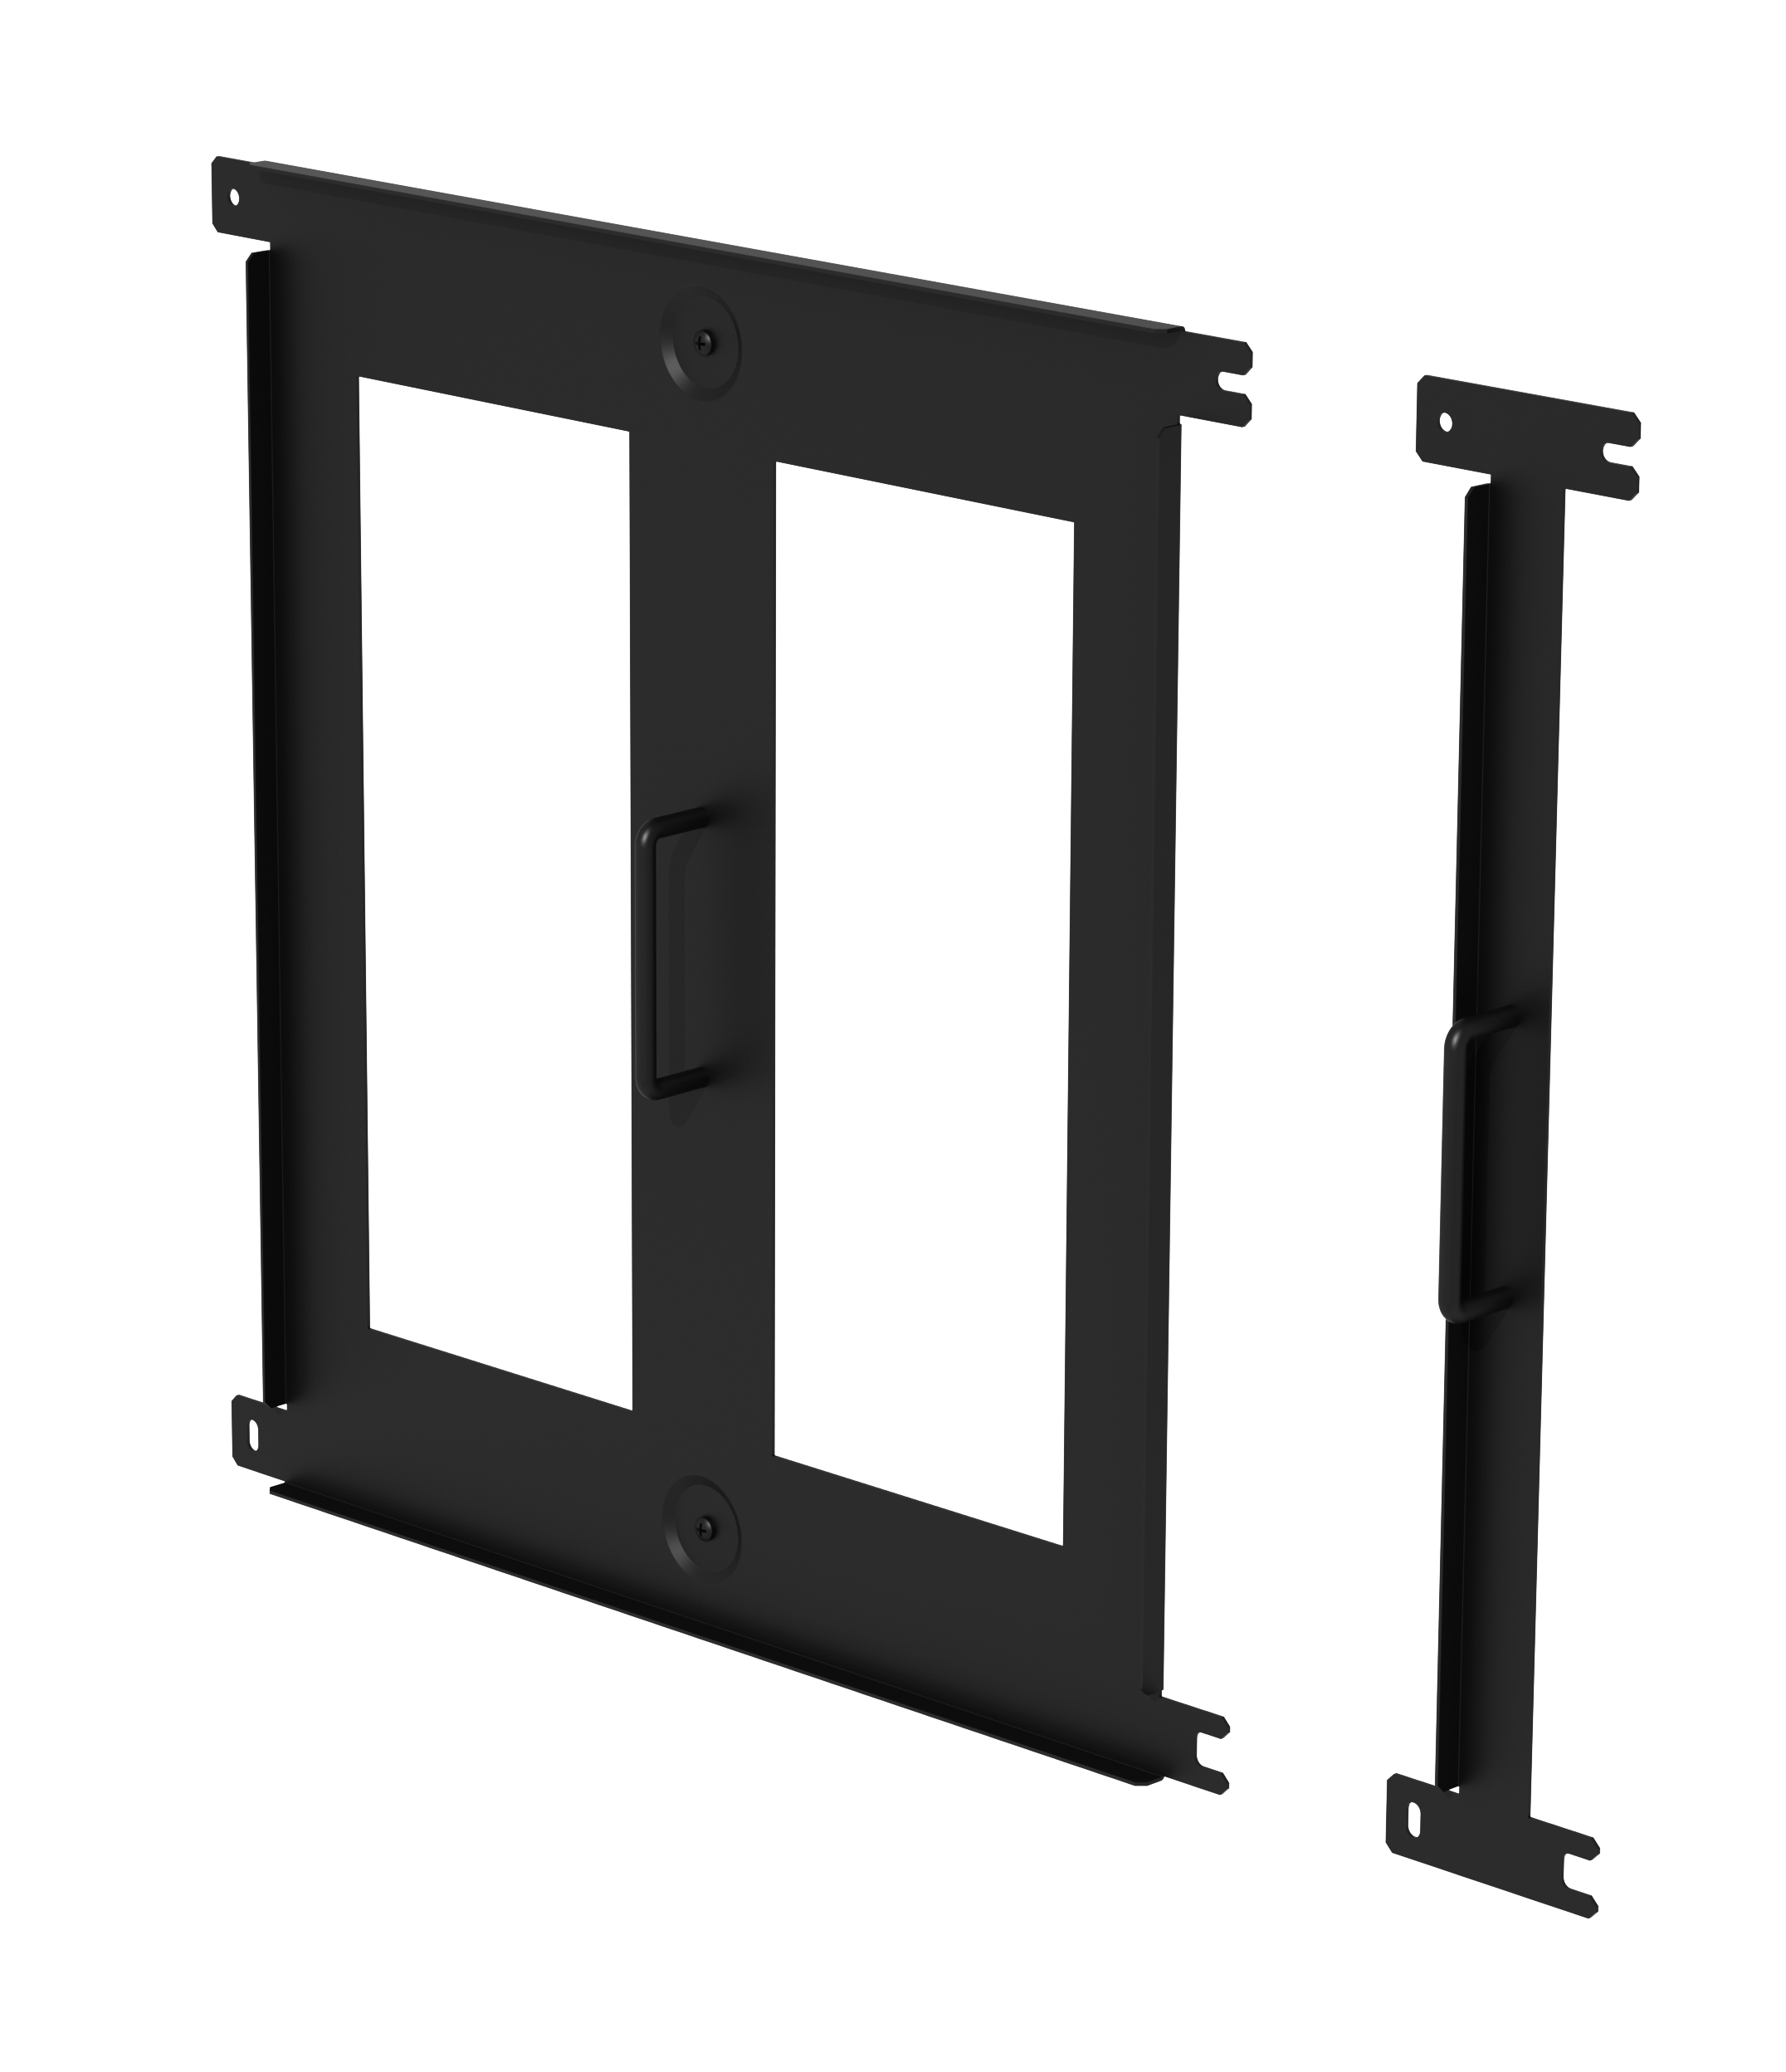 DS-VWRS053 Reusable Video Wall Spacer